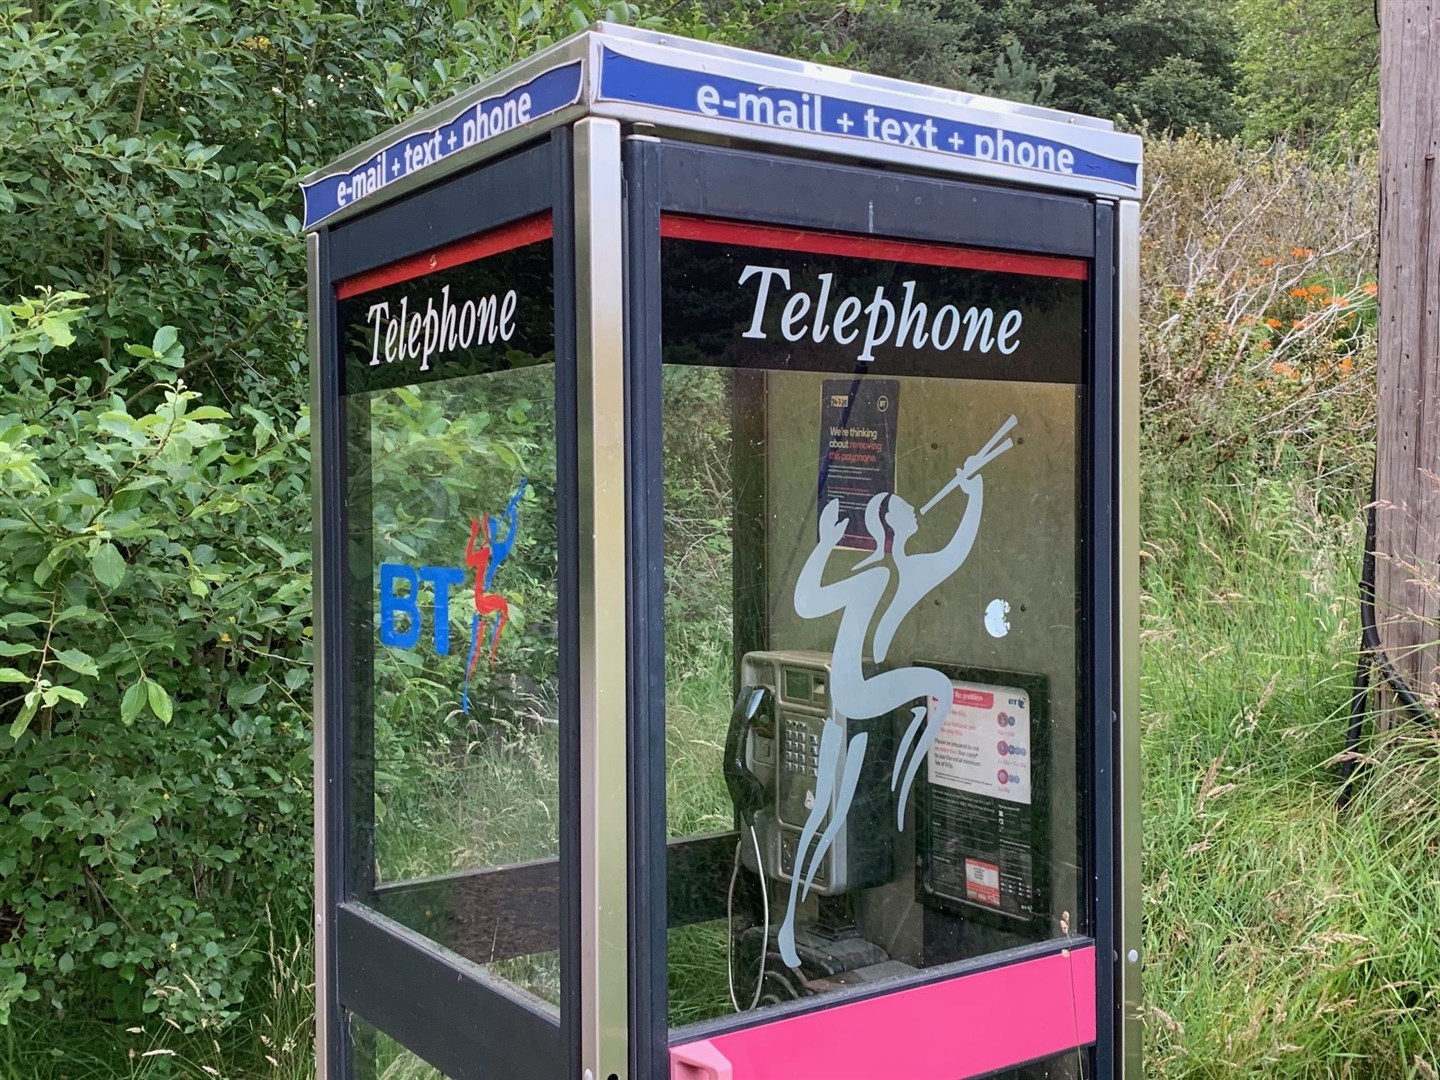 The payphone at Glenmore is one of those at risk of closure yet again.